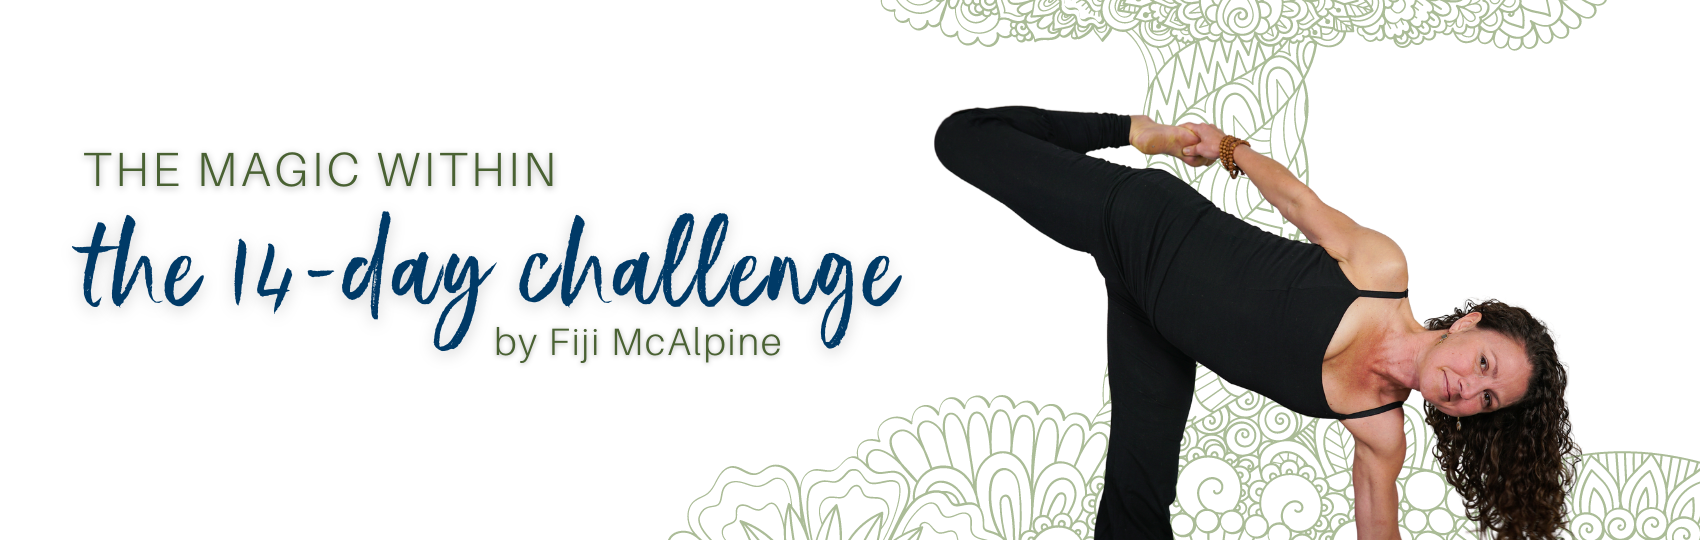 The Magic Within The 14-Day Challenge Blog Banner